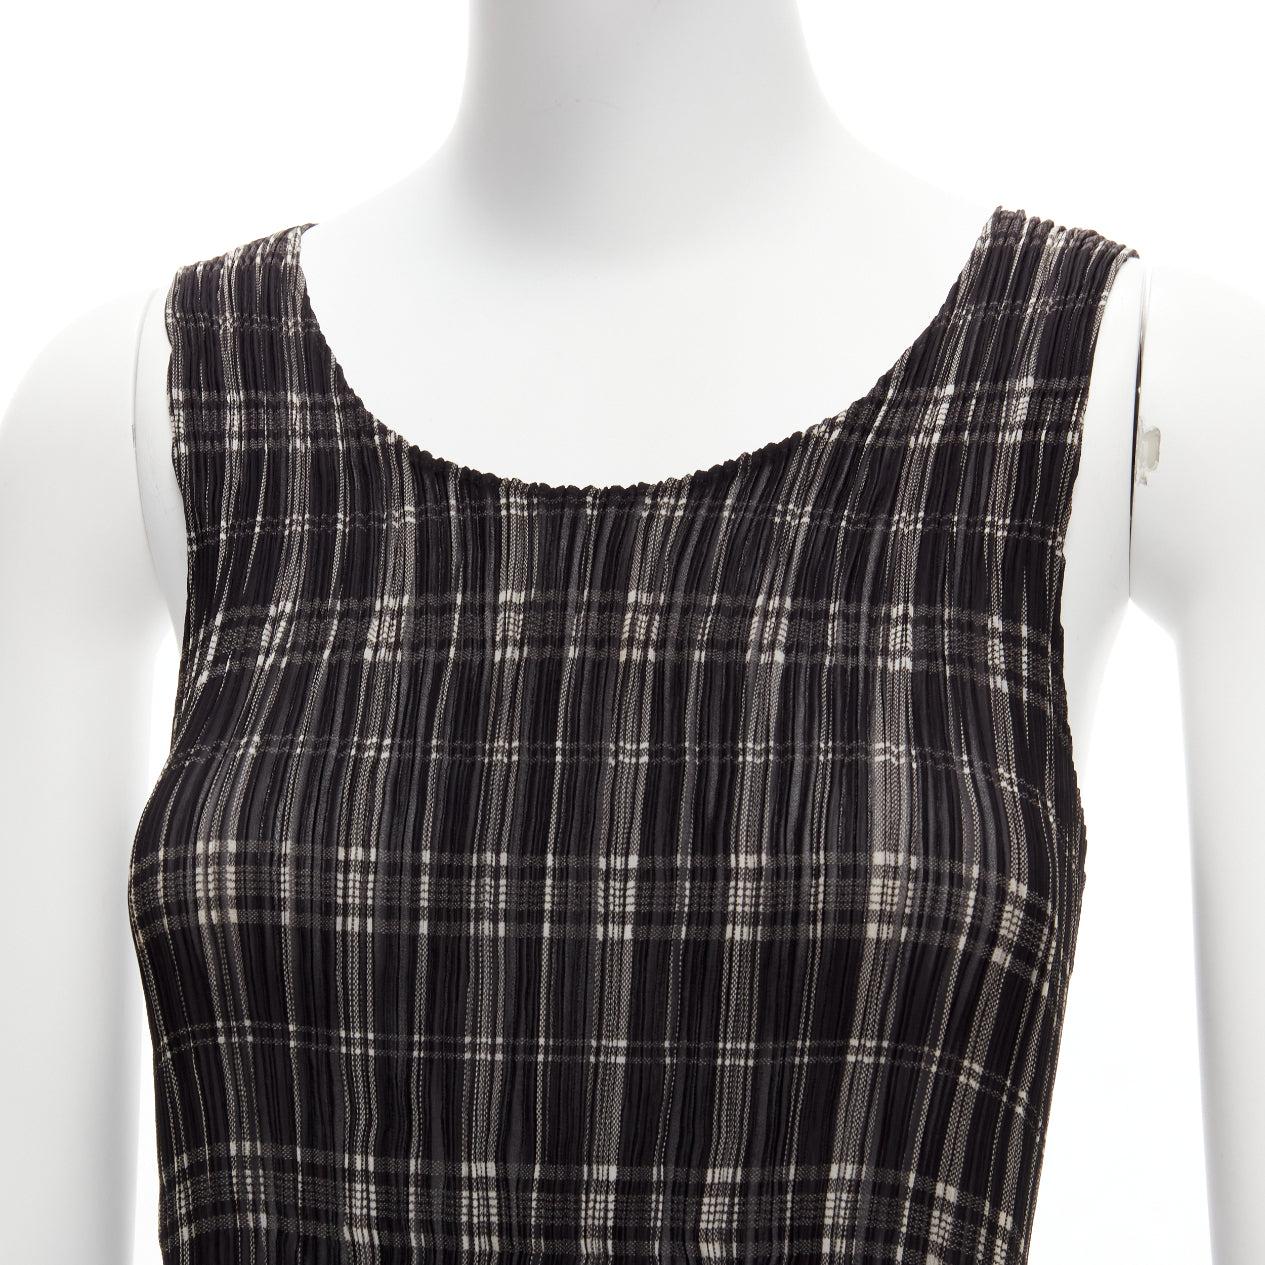 ISSEY MIYAKE Vintage black white plaid check plisse round neck tank top S
Reference: PYCN/A00084
Brand: Issey Miyake
Material: Polyester
Color: Black, White
Pattern: Plaid
Closure: Pullover
Made in: Japan

CONDITION:
Condition: Excellent, this item